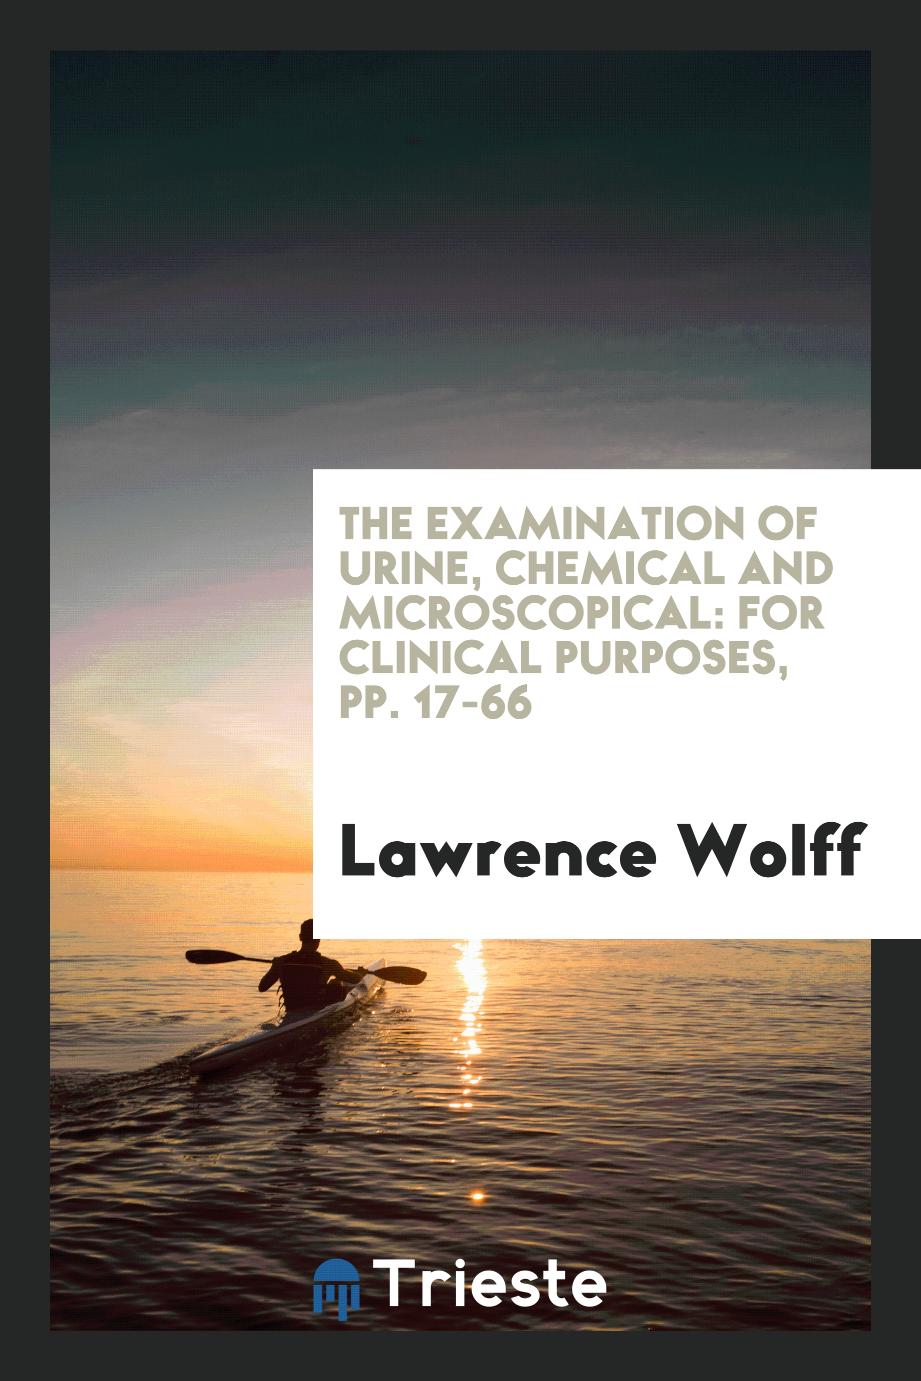 The Examination of Urine, Chemical and Microscopical: For Clinical Purposes, pp. 17-66